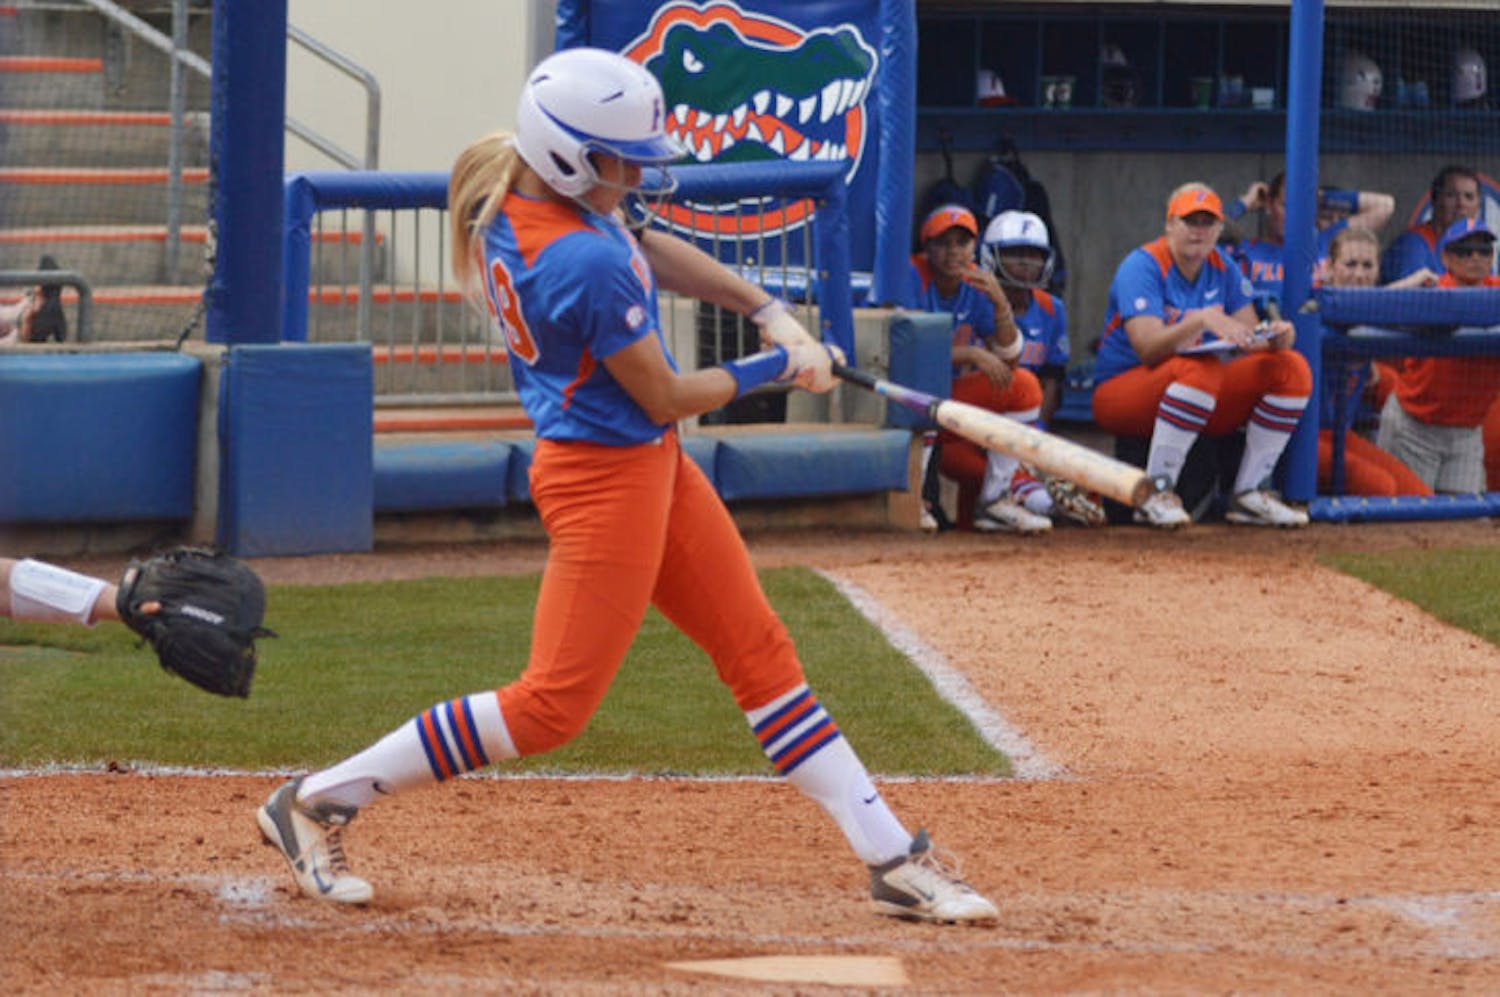 Taylor Schwarz bats during Florida’s 8-0 win against Indiana on Feb. 22 at Katie Seashole Pressly Stadium. Schwarz is batting .281 and has six home runs in 45 games this season.